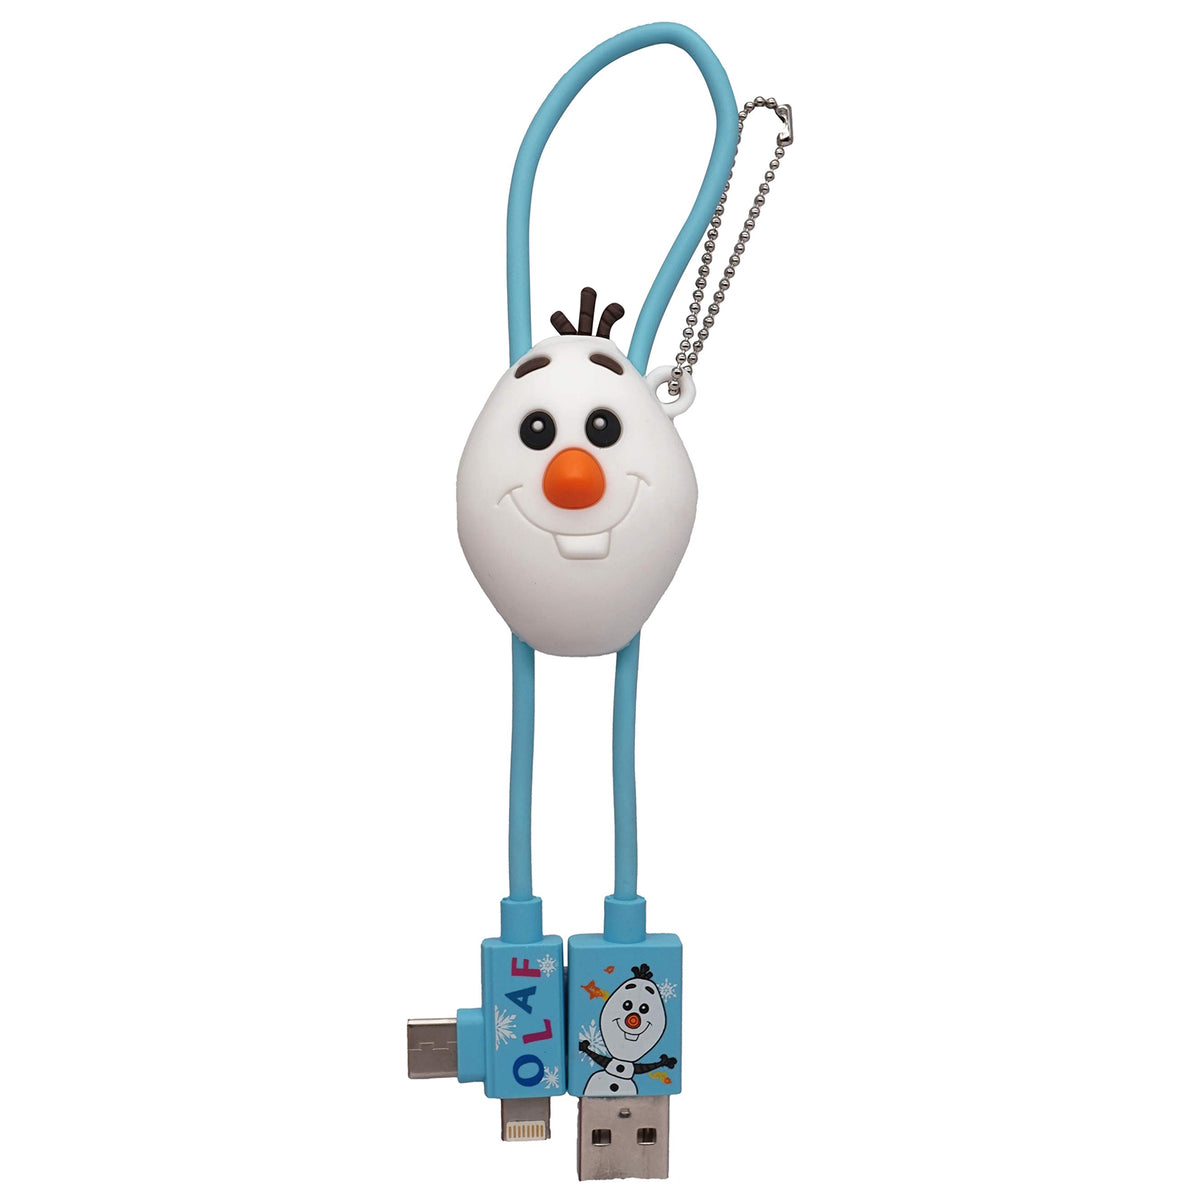 Disney Frozen Olaf USB Charging Cable with Type C and Micro USB Attachments